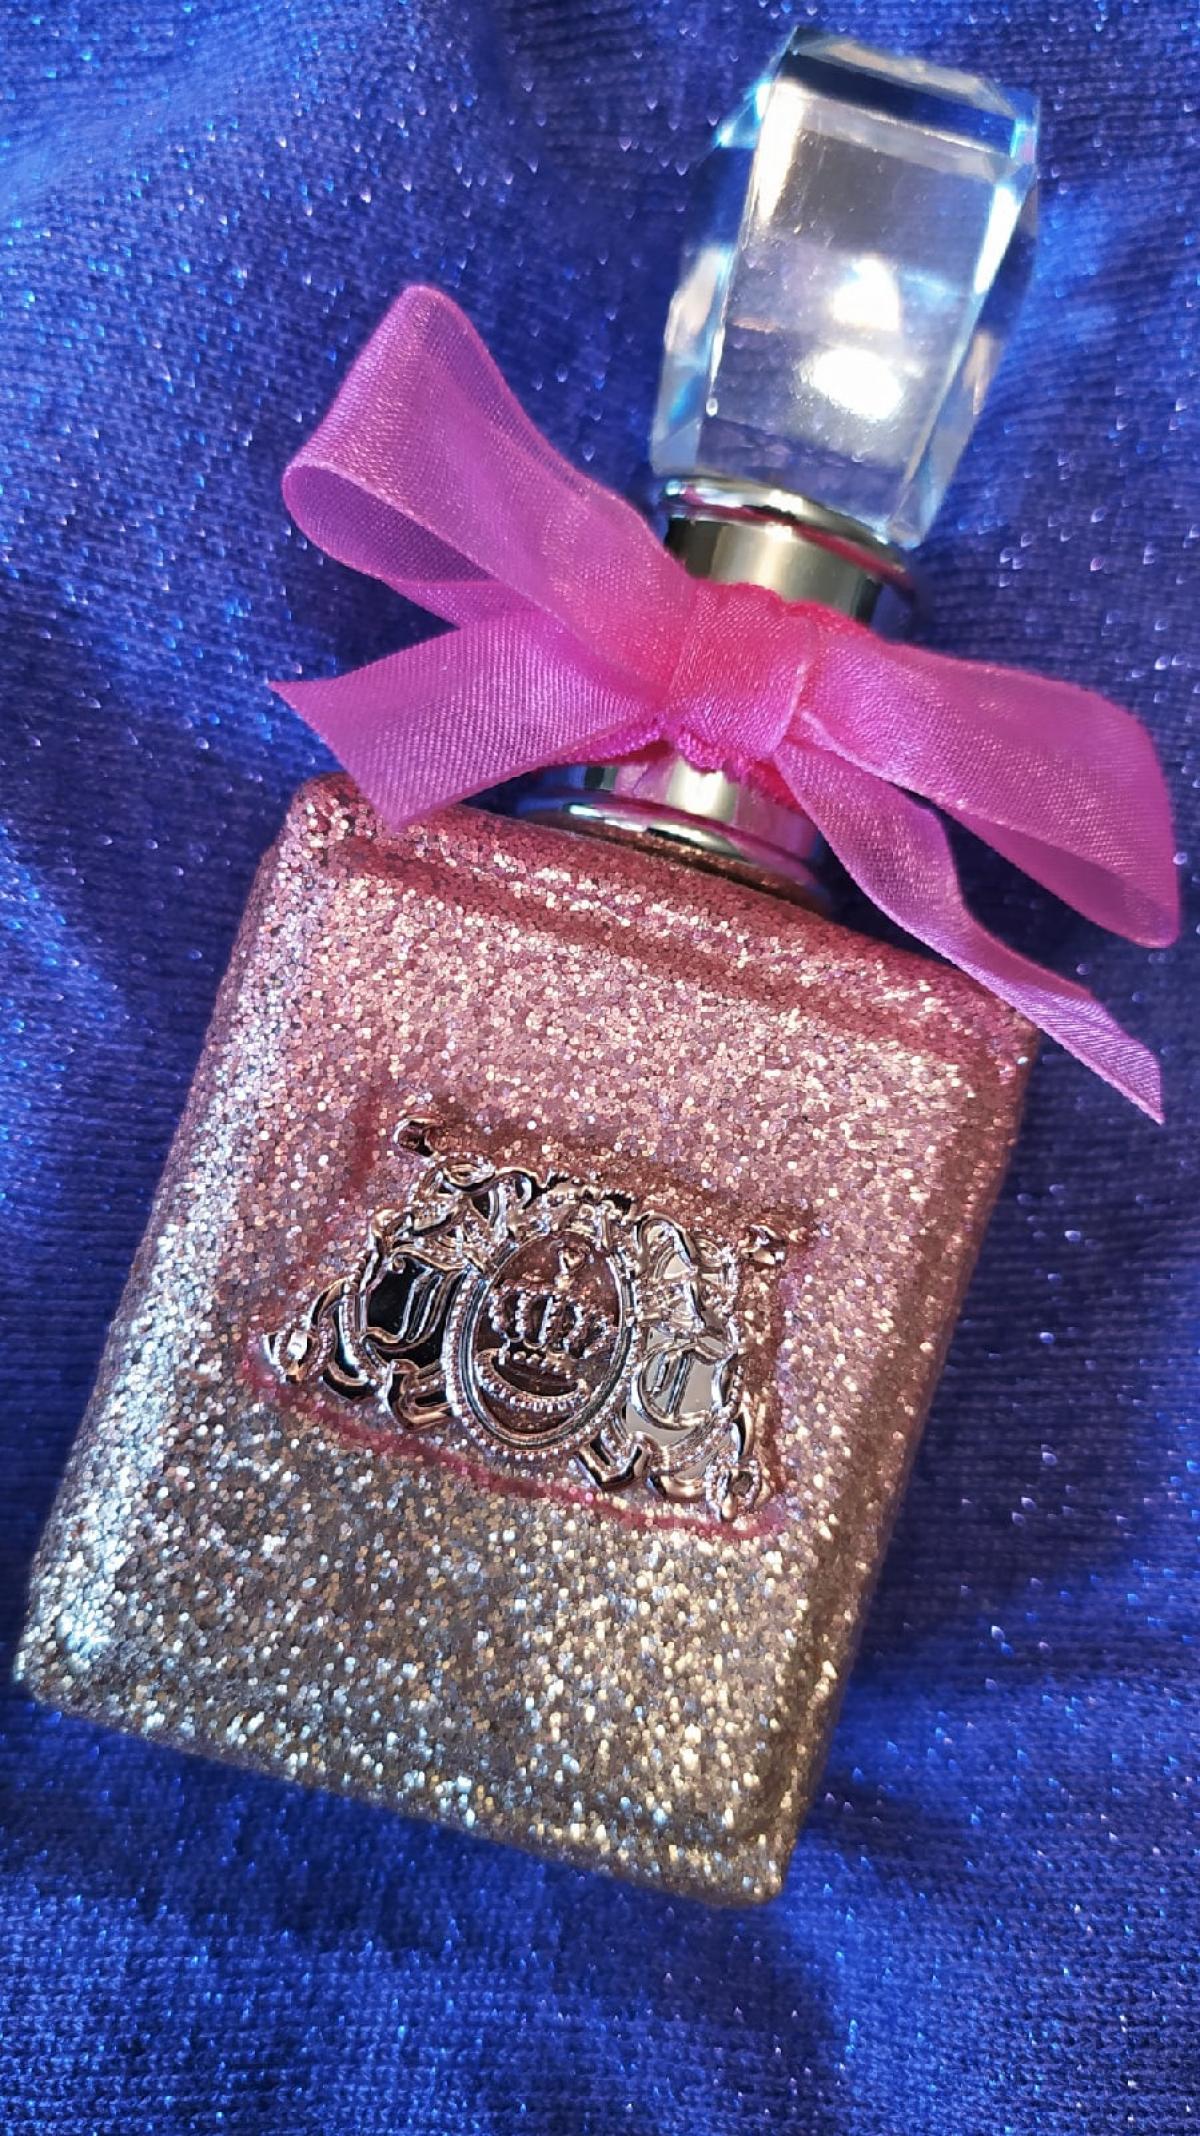 Viva La Juicy Rose Juicy Couture perfume - a fragrance for women 2015